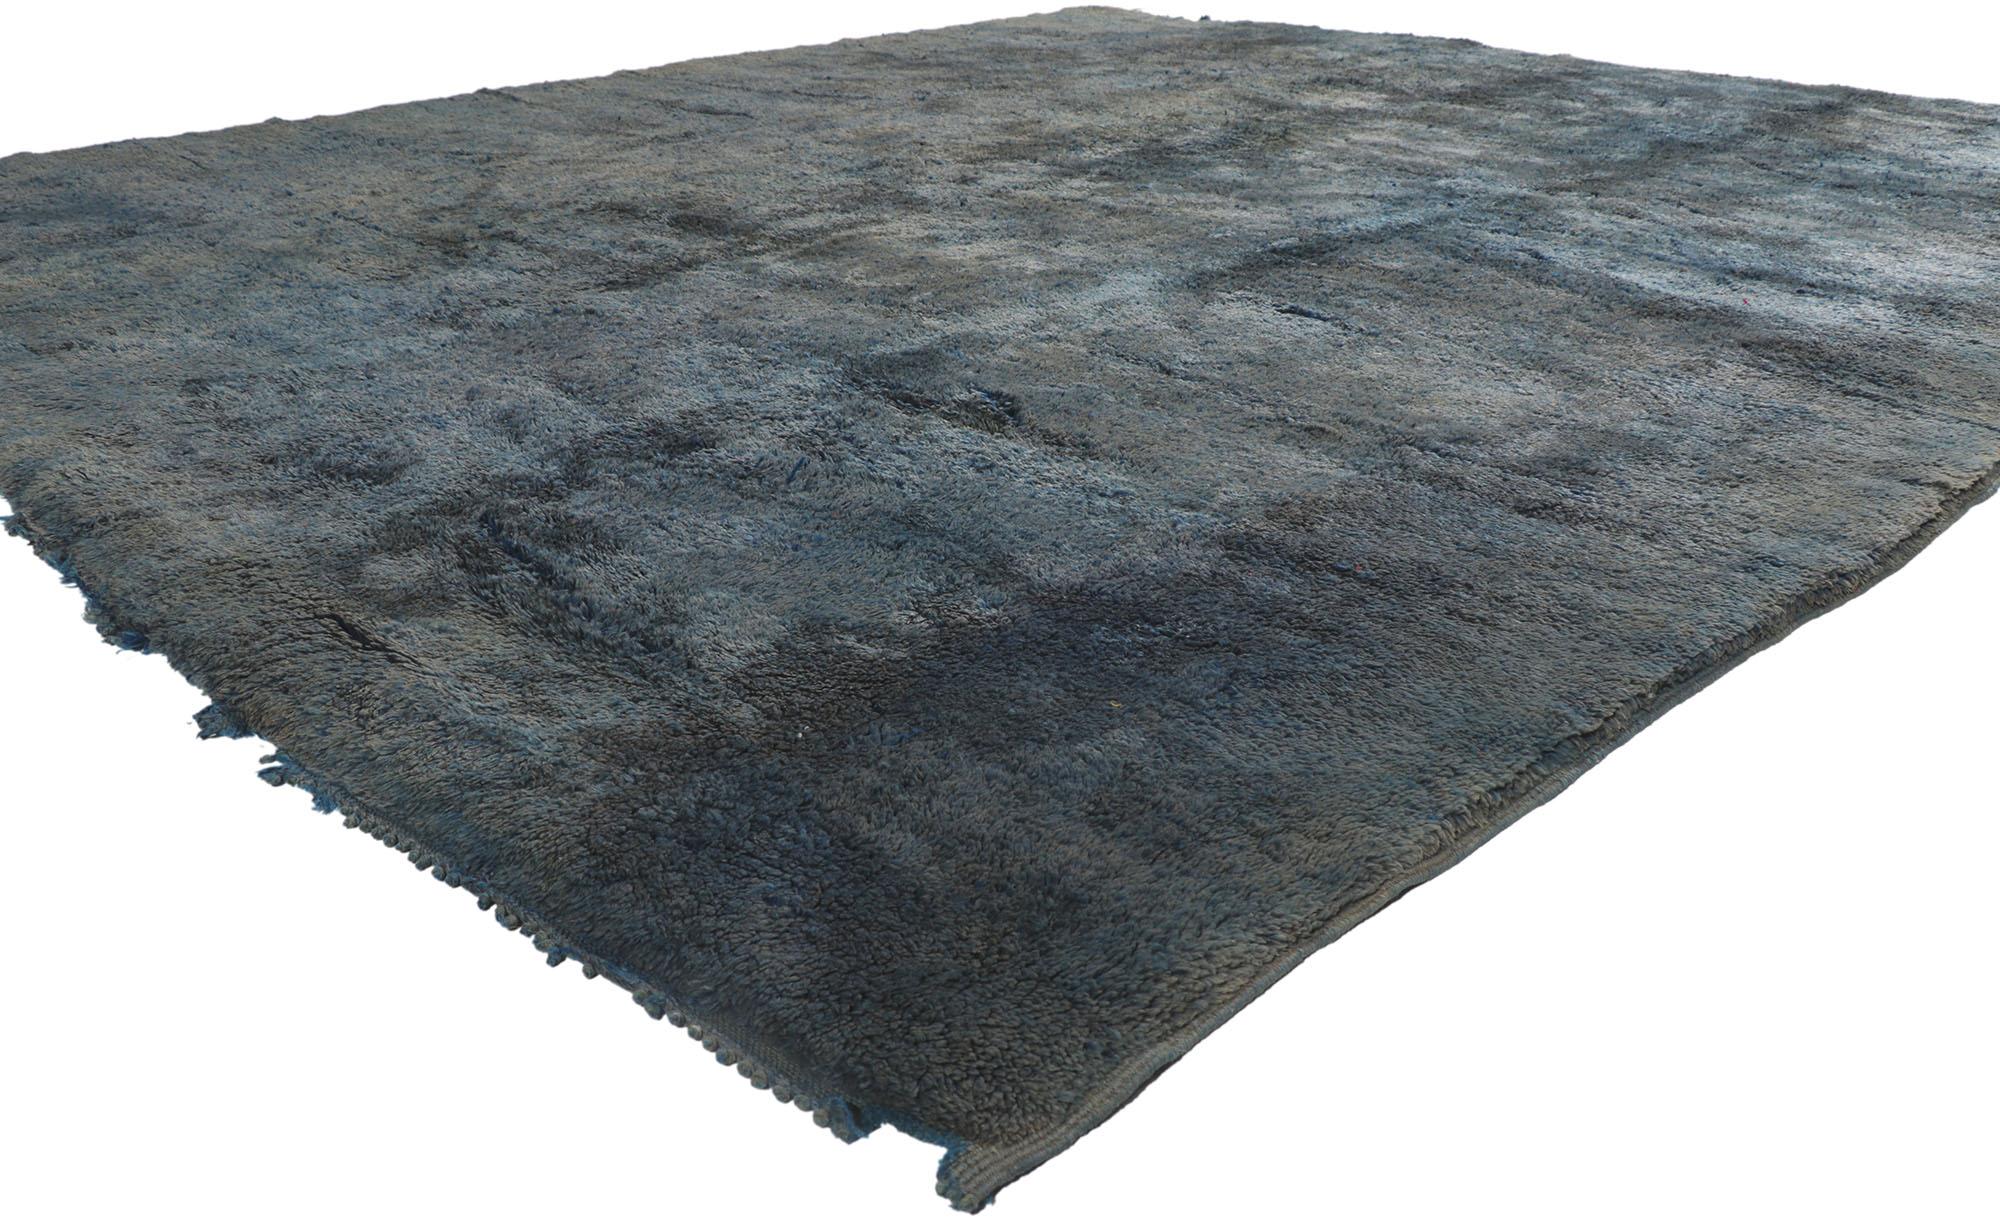 21467 Vintage Berber Moroccan Rug 09'06 x 10'08. With its simplicity, plush pile and abstract expressionism, this hand knotted wool vintage Berber Moroccan rug is a captivating vision of woven beauty. Natural abrash gradations of dark and moody